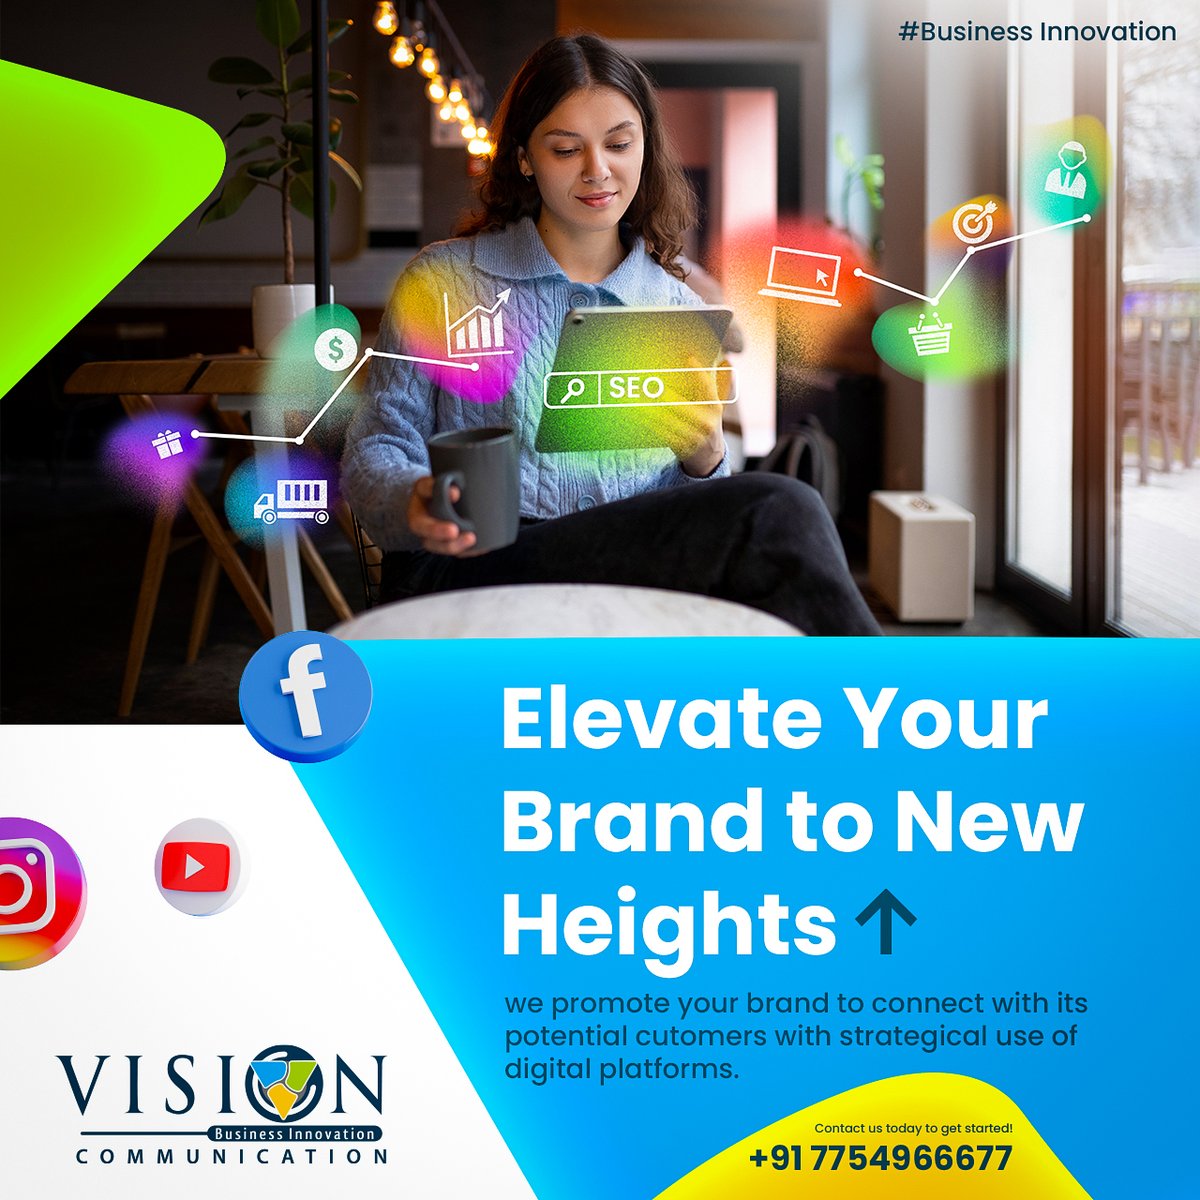 Elevate your Brand to New Heights.
Call Us  +91 7754966677
#Advertising #PR #Media #DigitalMarketing #marketing #socialmediamarketing #seo #branding #marketingstrategy  #webdesign #WebPromotion #graphicdesign
by #VisionCommunication #BusinessInnovation #GomtiNagar #Lucknow